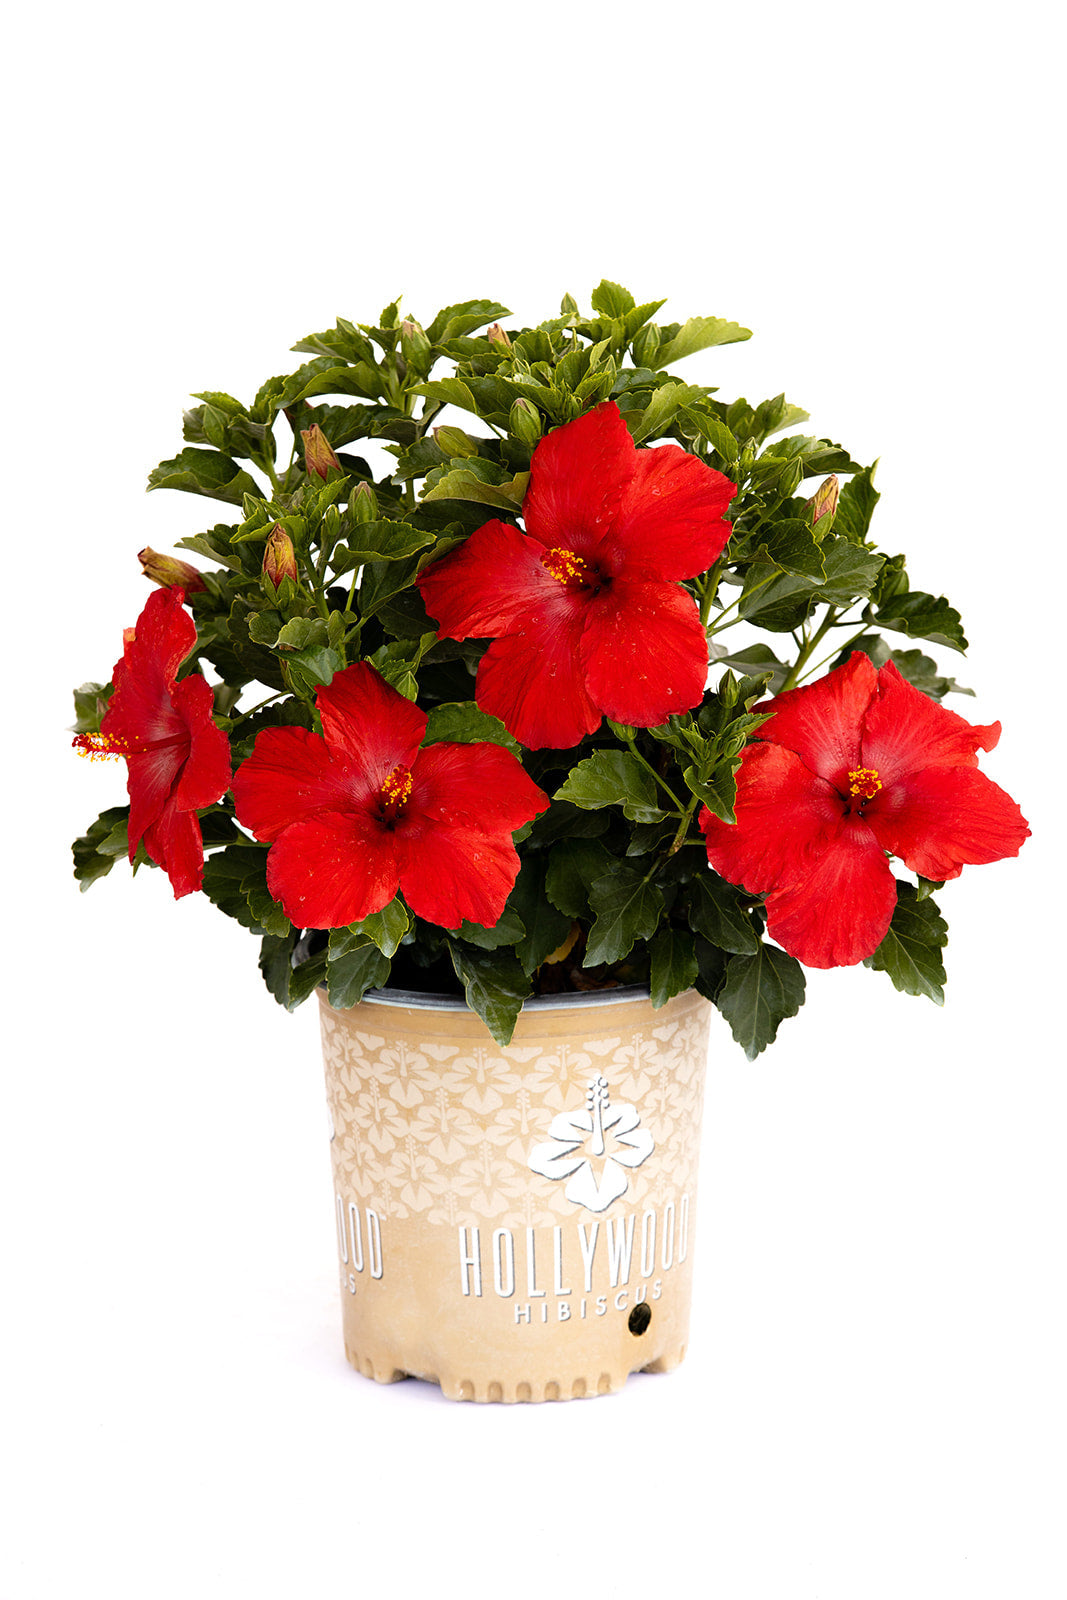 First to Arrive™ - Hollywood® Hibiscus - 9" Self Water Pot